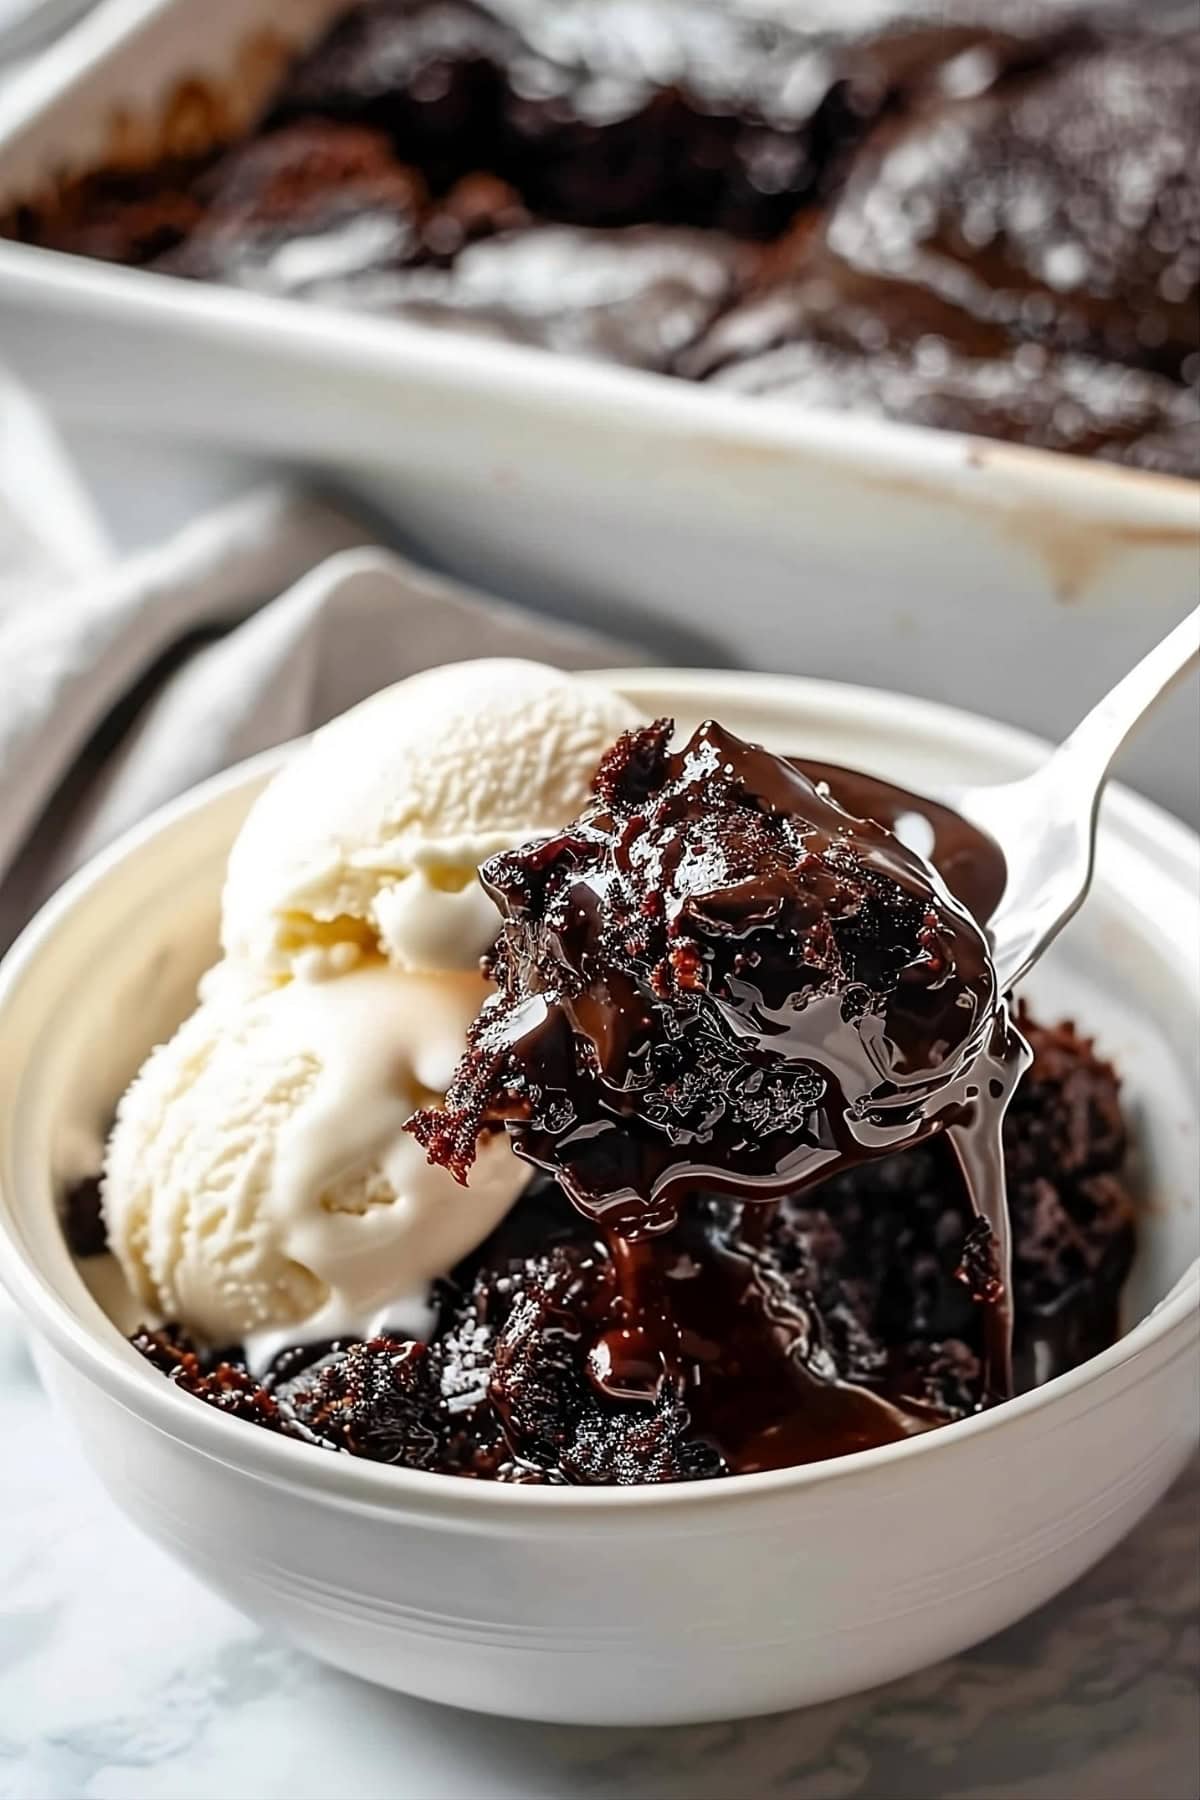 Spoon scooping a serving of gooey and chocolatey hot fudge cake from a white bowl.